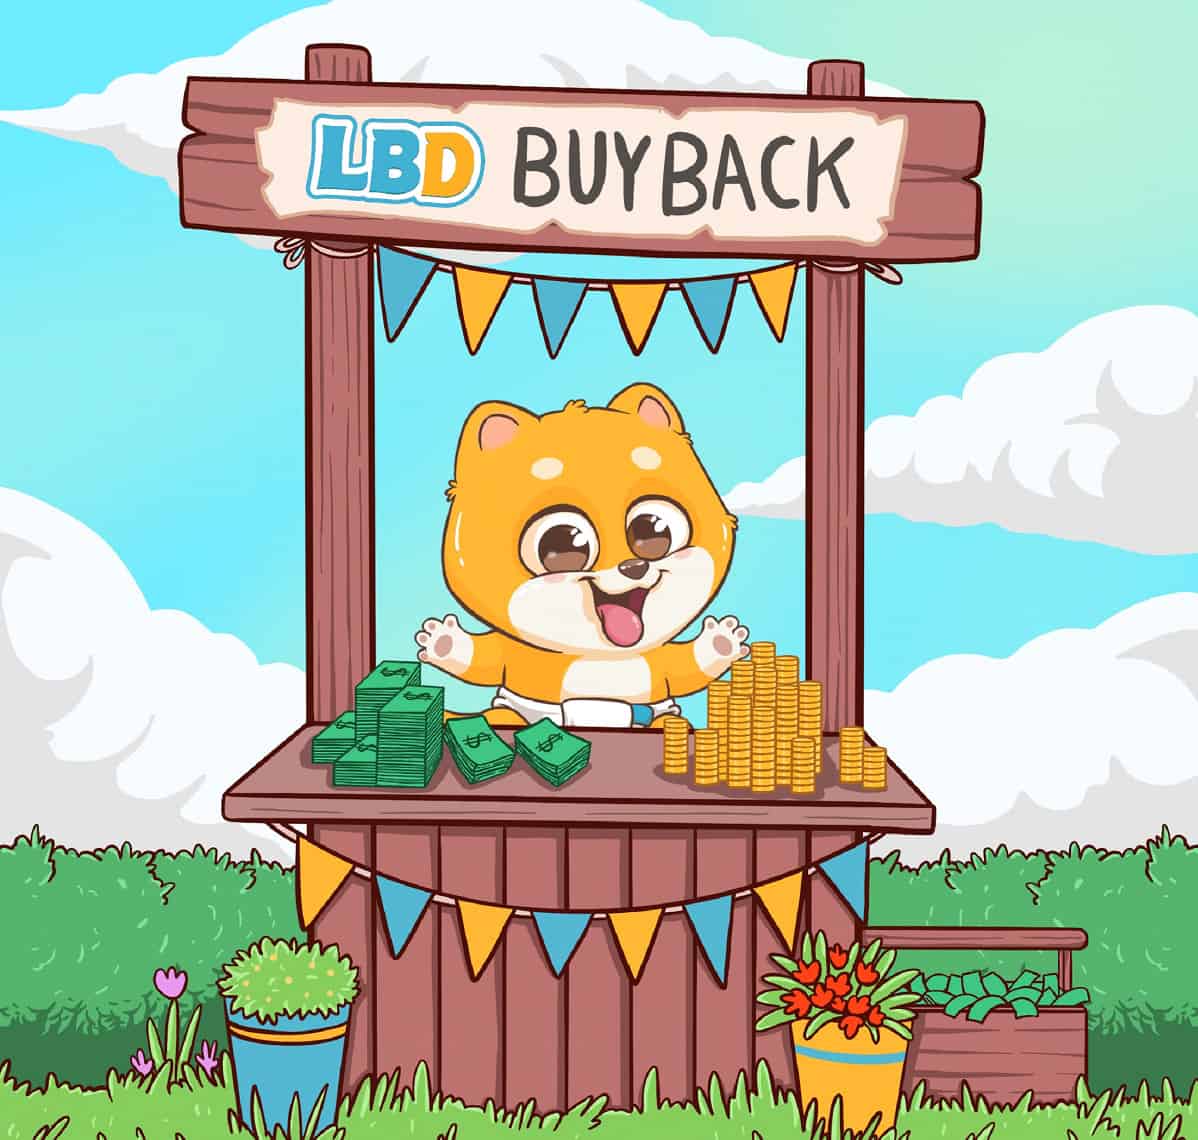 Little-baby-doge-shows-the-way-forward-in-defi-with-the-launch-of-a-token-buyback-event